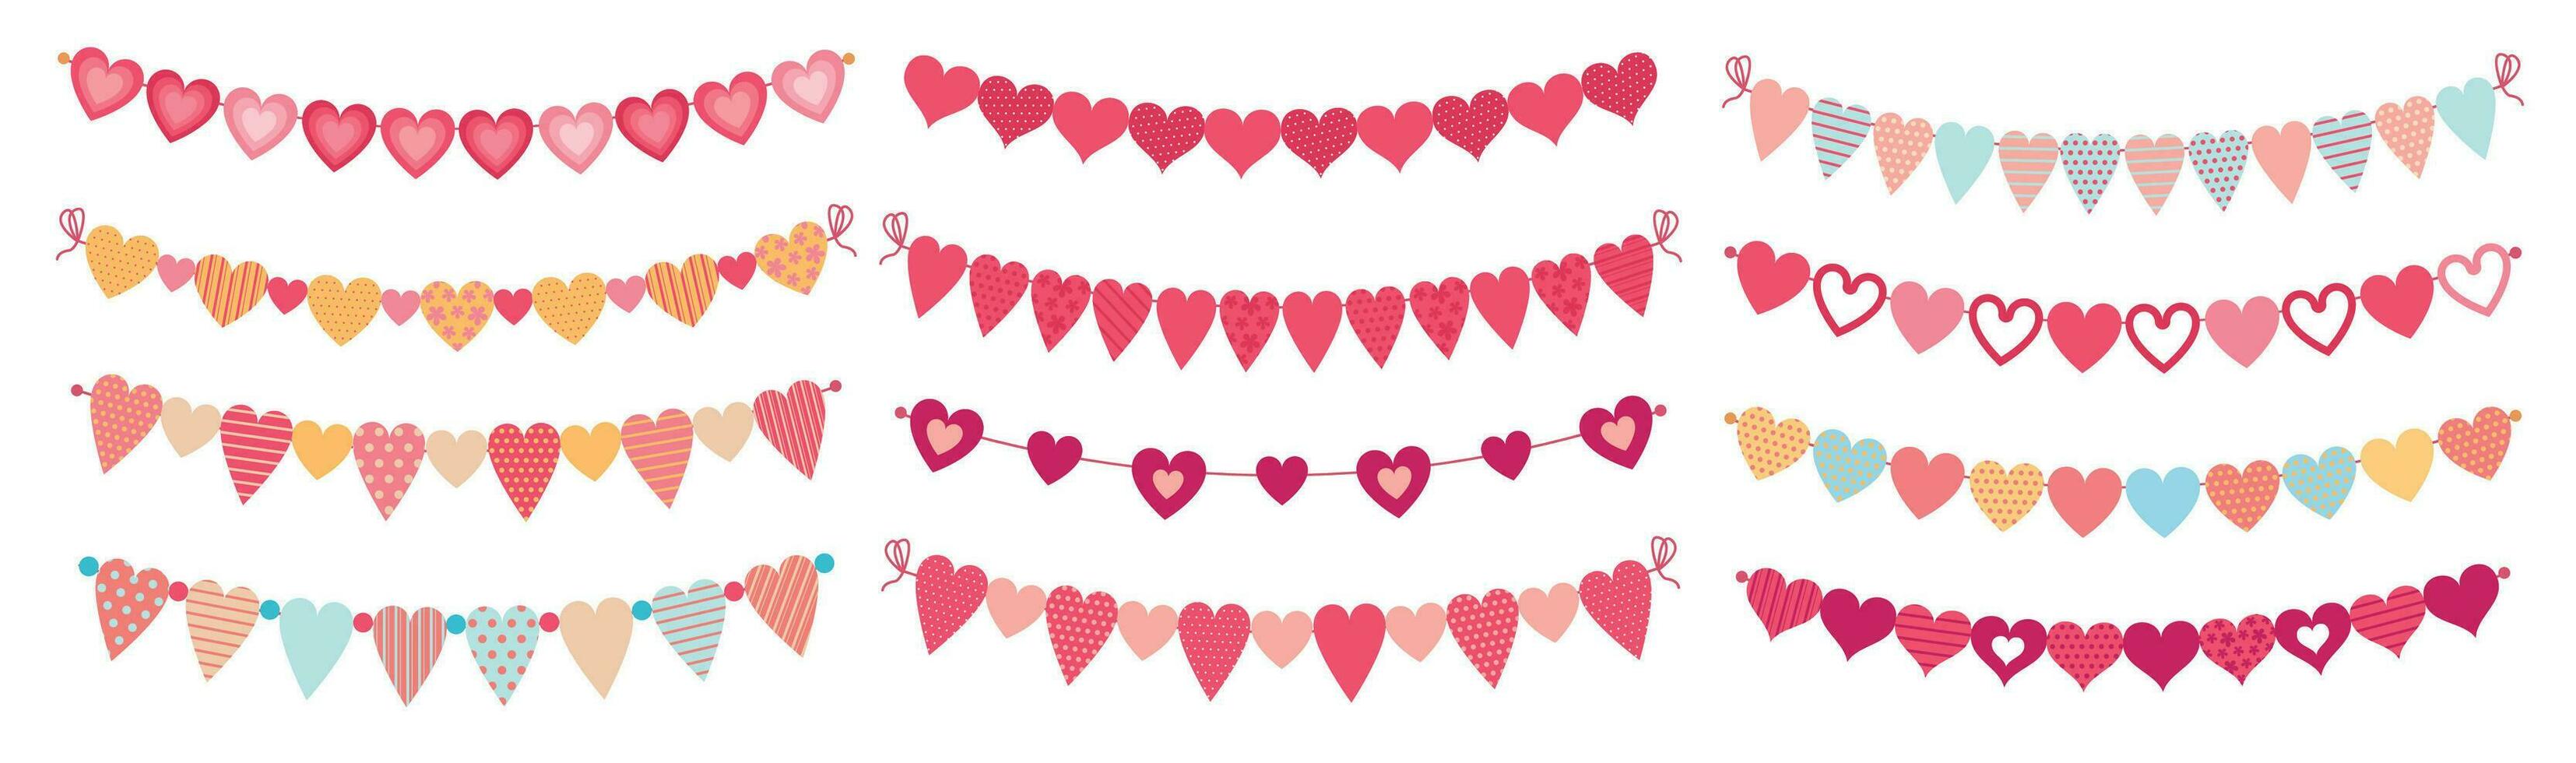 Bunting hearts. Love valentines heart shapes buntings, wedding day decorations and ornament cute heart flags vector set